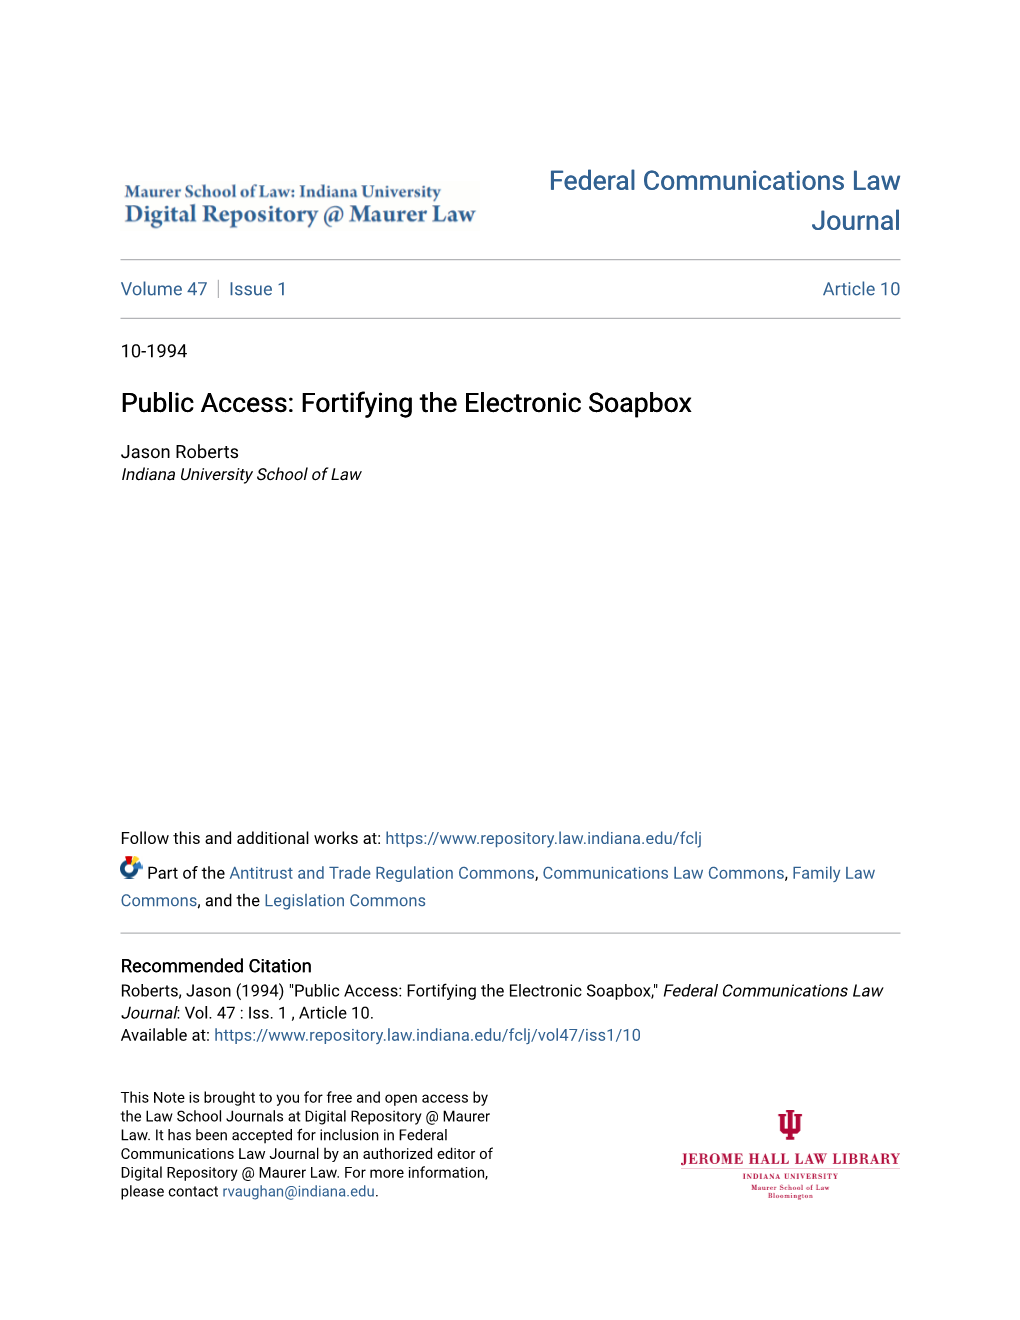 Public Access: Fortifying the Electronic Soapbox